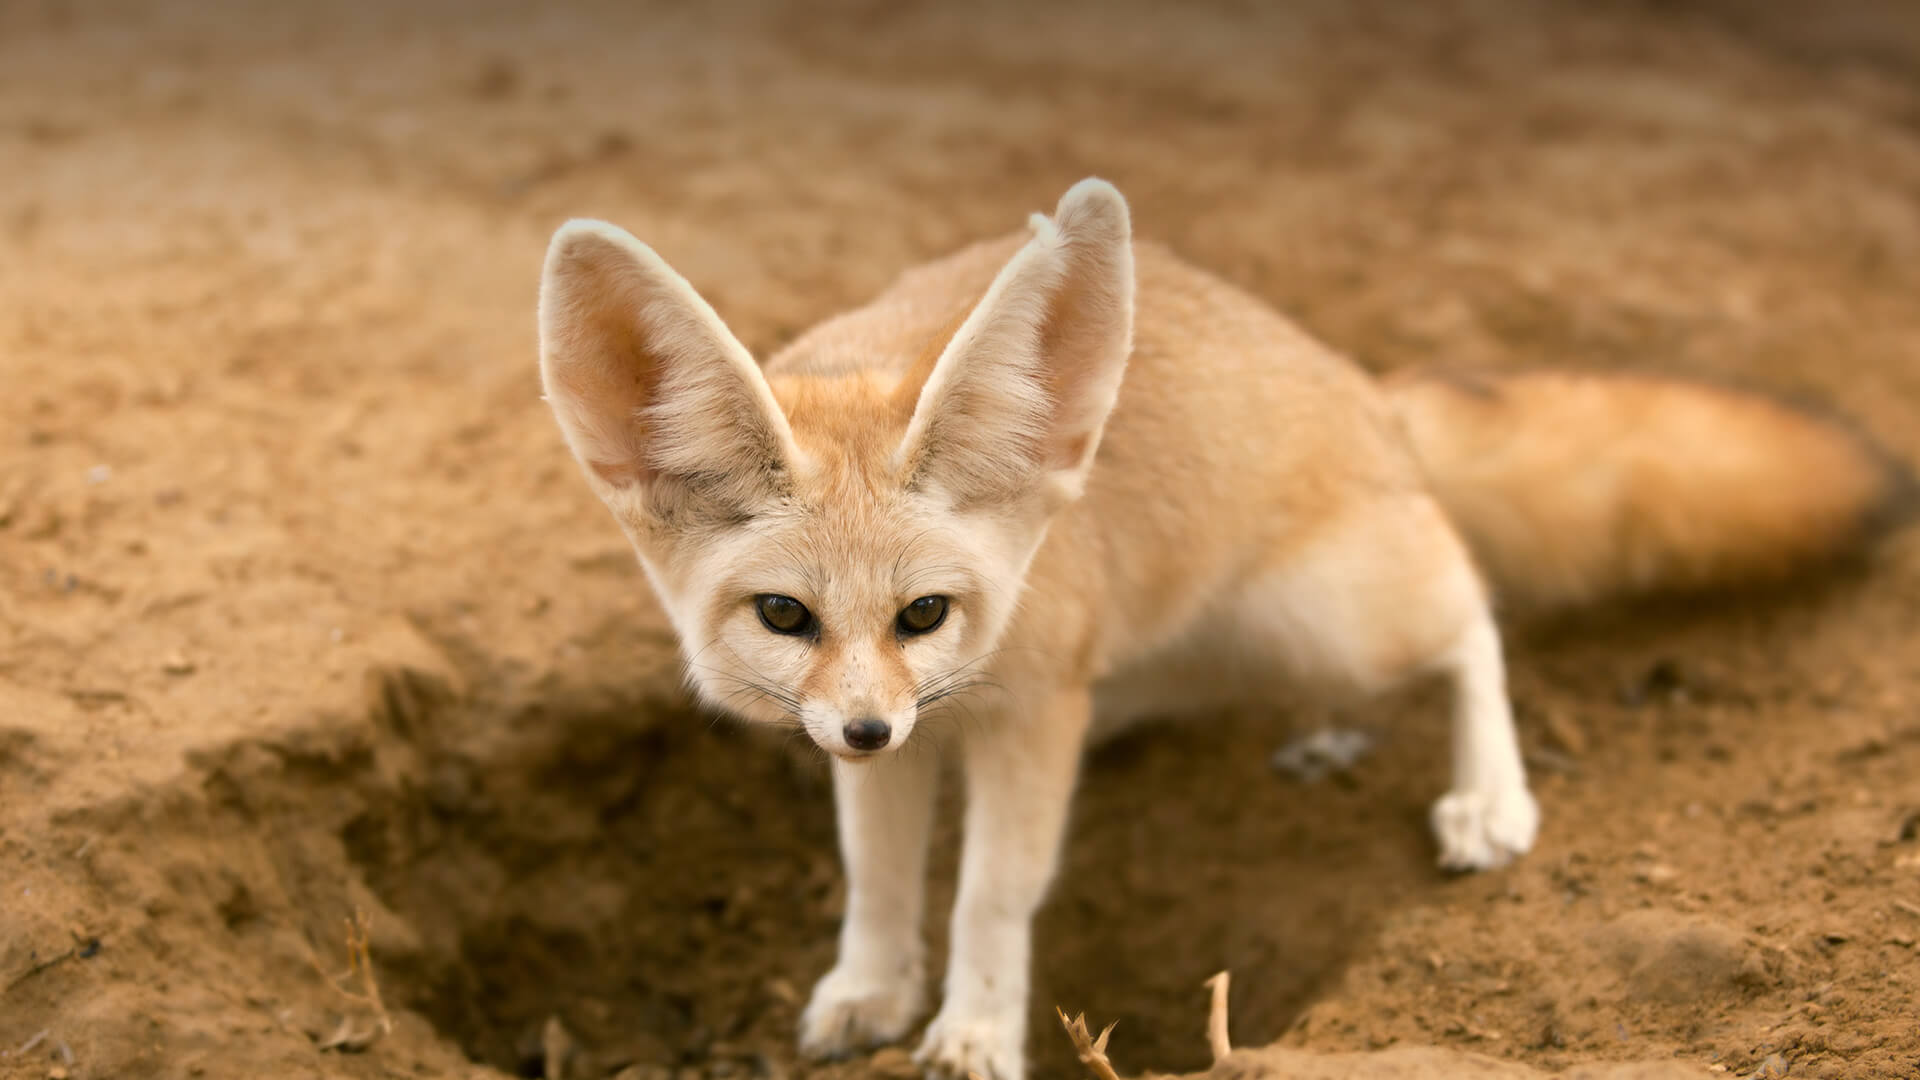 Fennec fox standing over hole in dirt. 